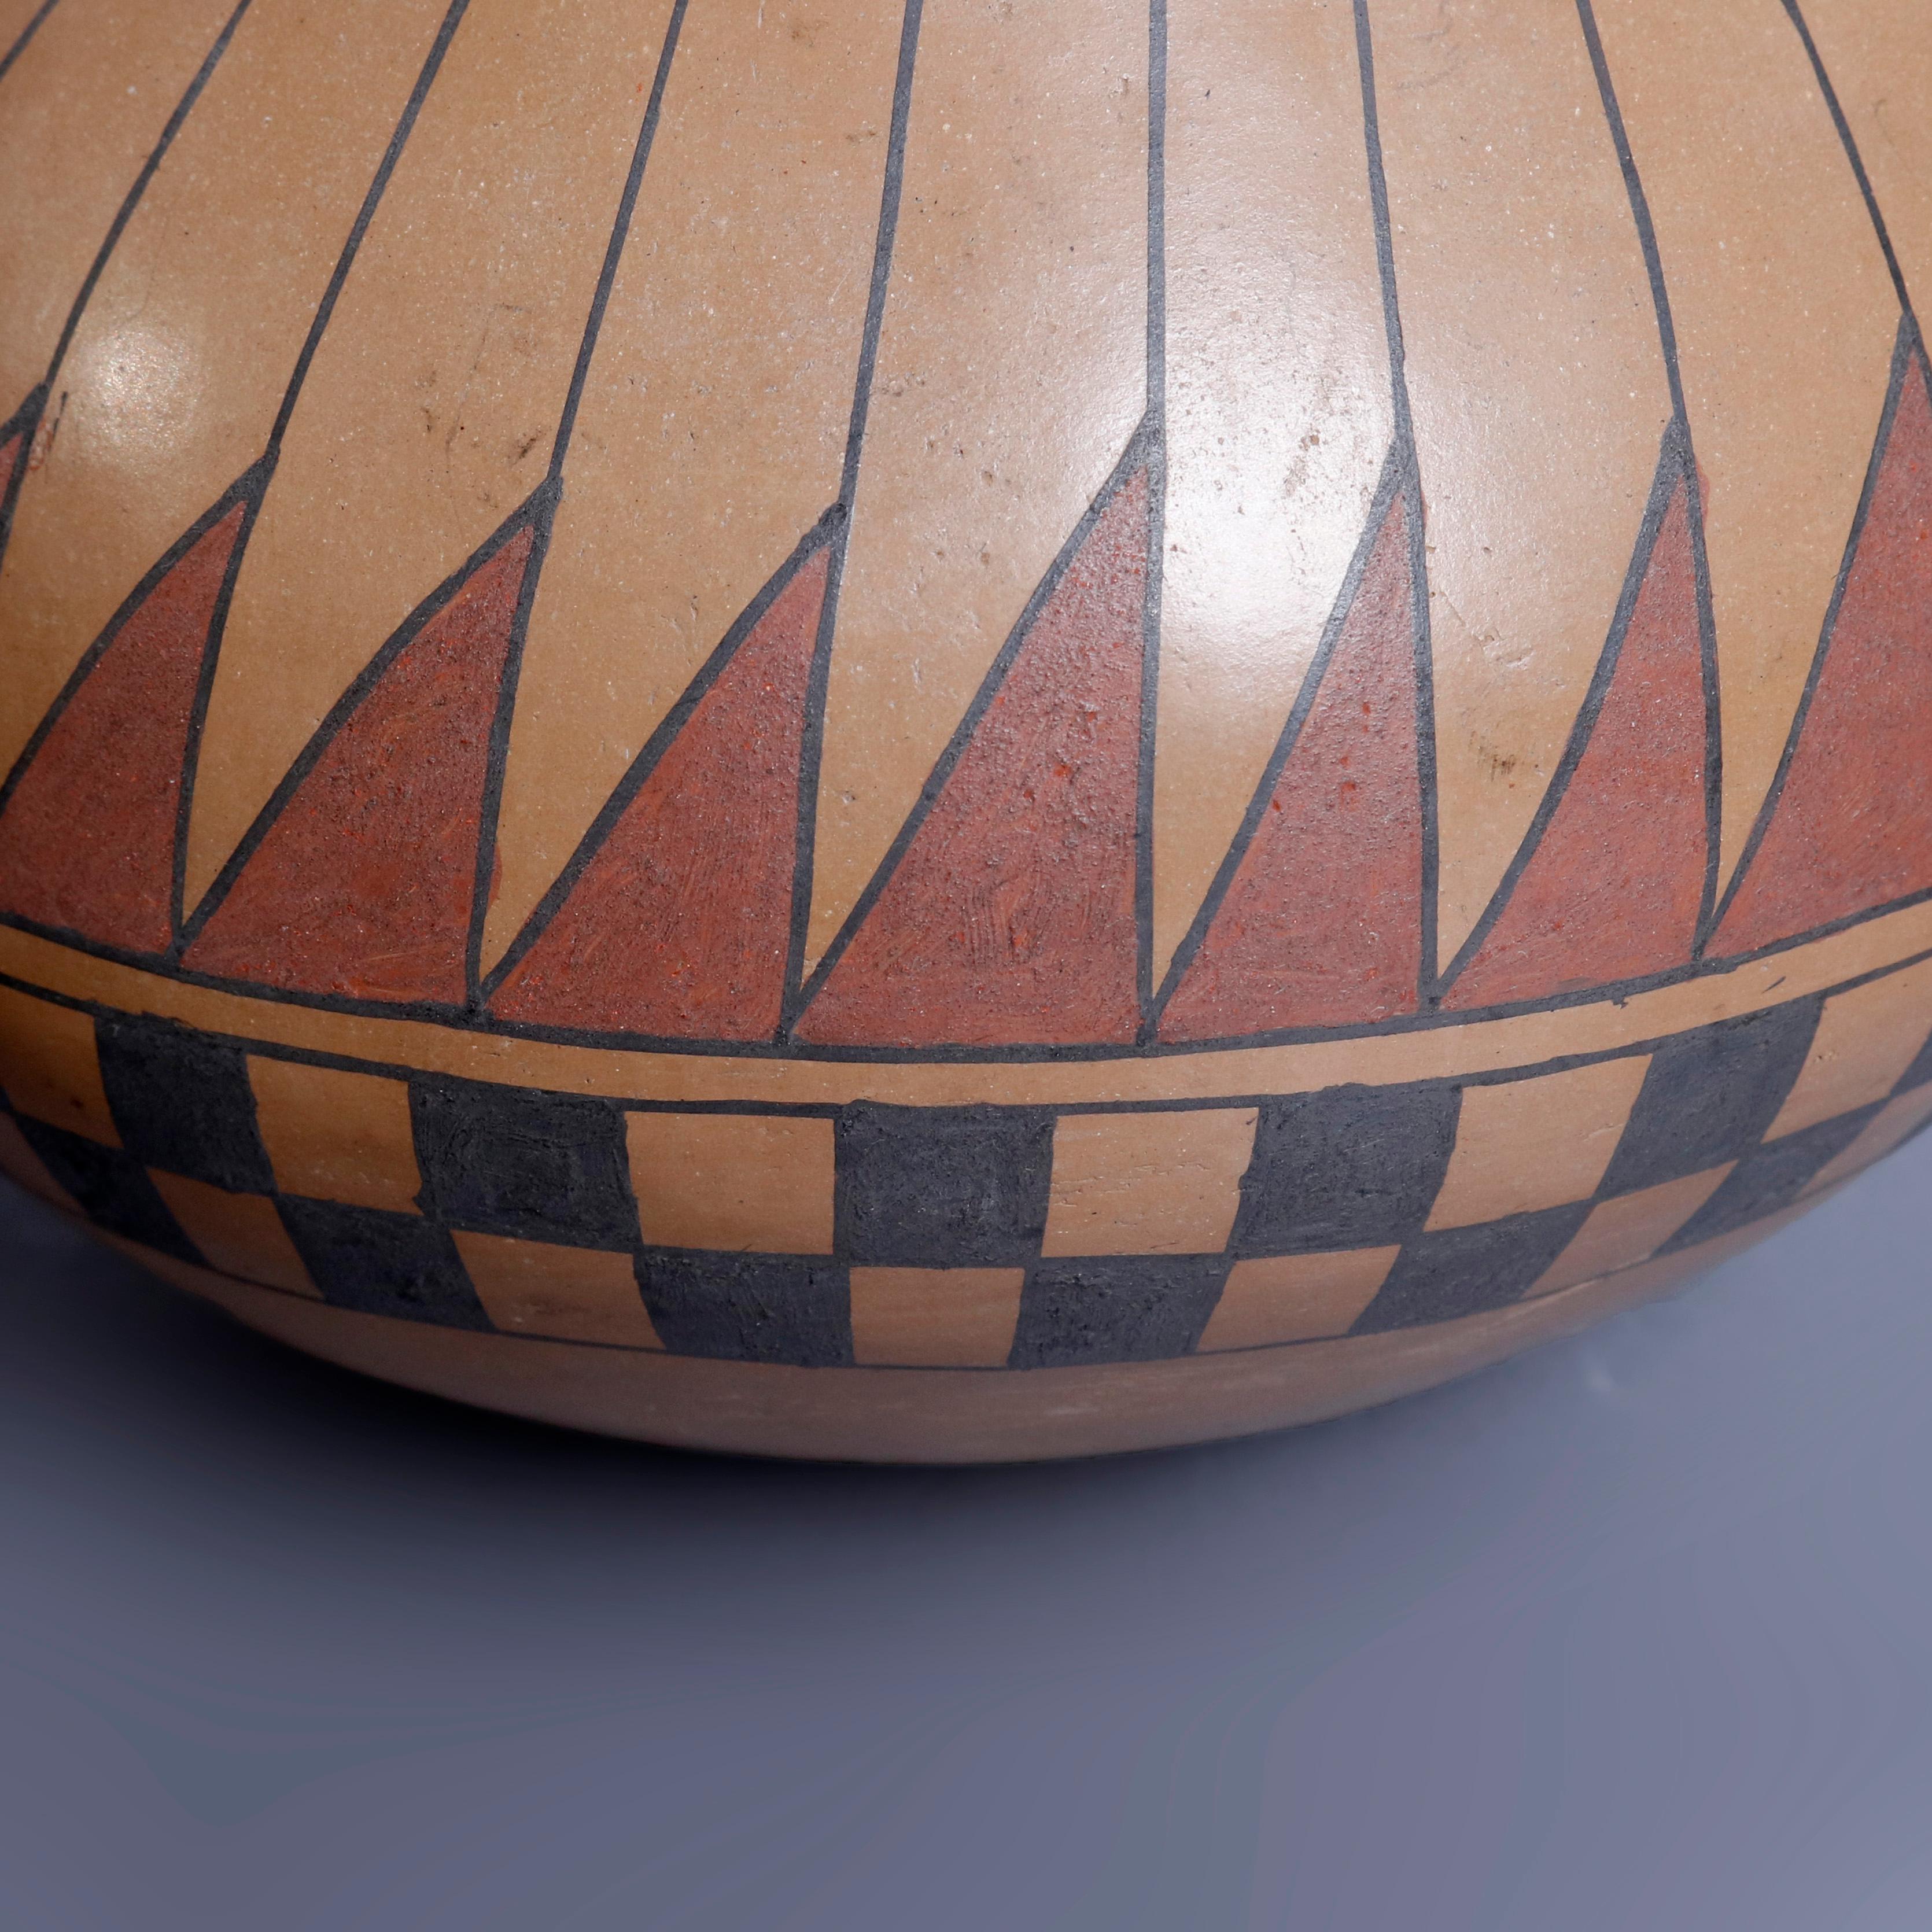 An antique Southwest Native American Indian Acoma style hand thrown pottery vase by Beto Tena offers bulbous form with polychromed repeating stylized feather band over checkerboard band hand painted with yucca brush, artist signed on base, 20th